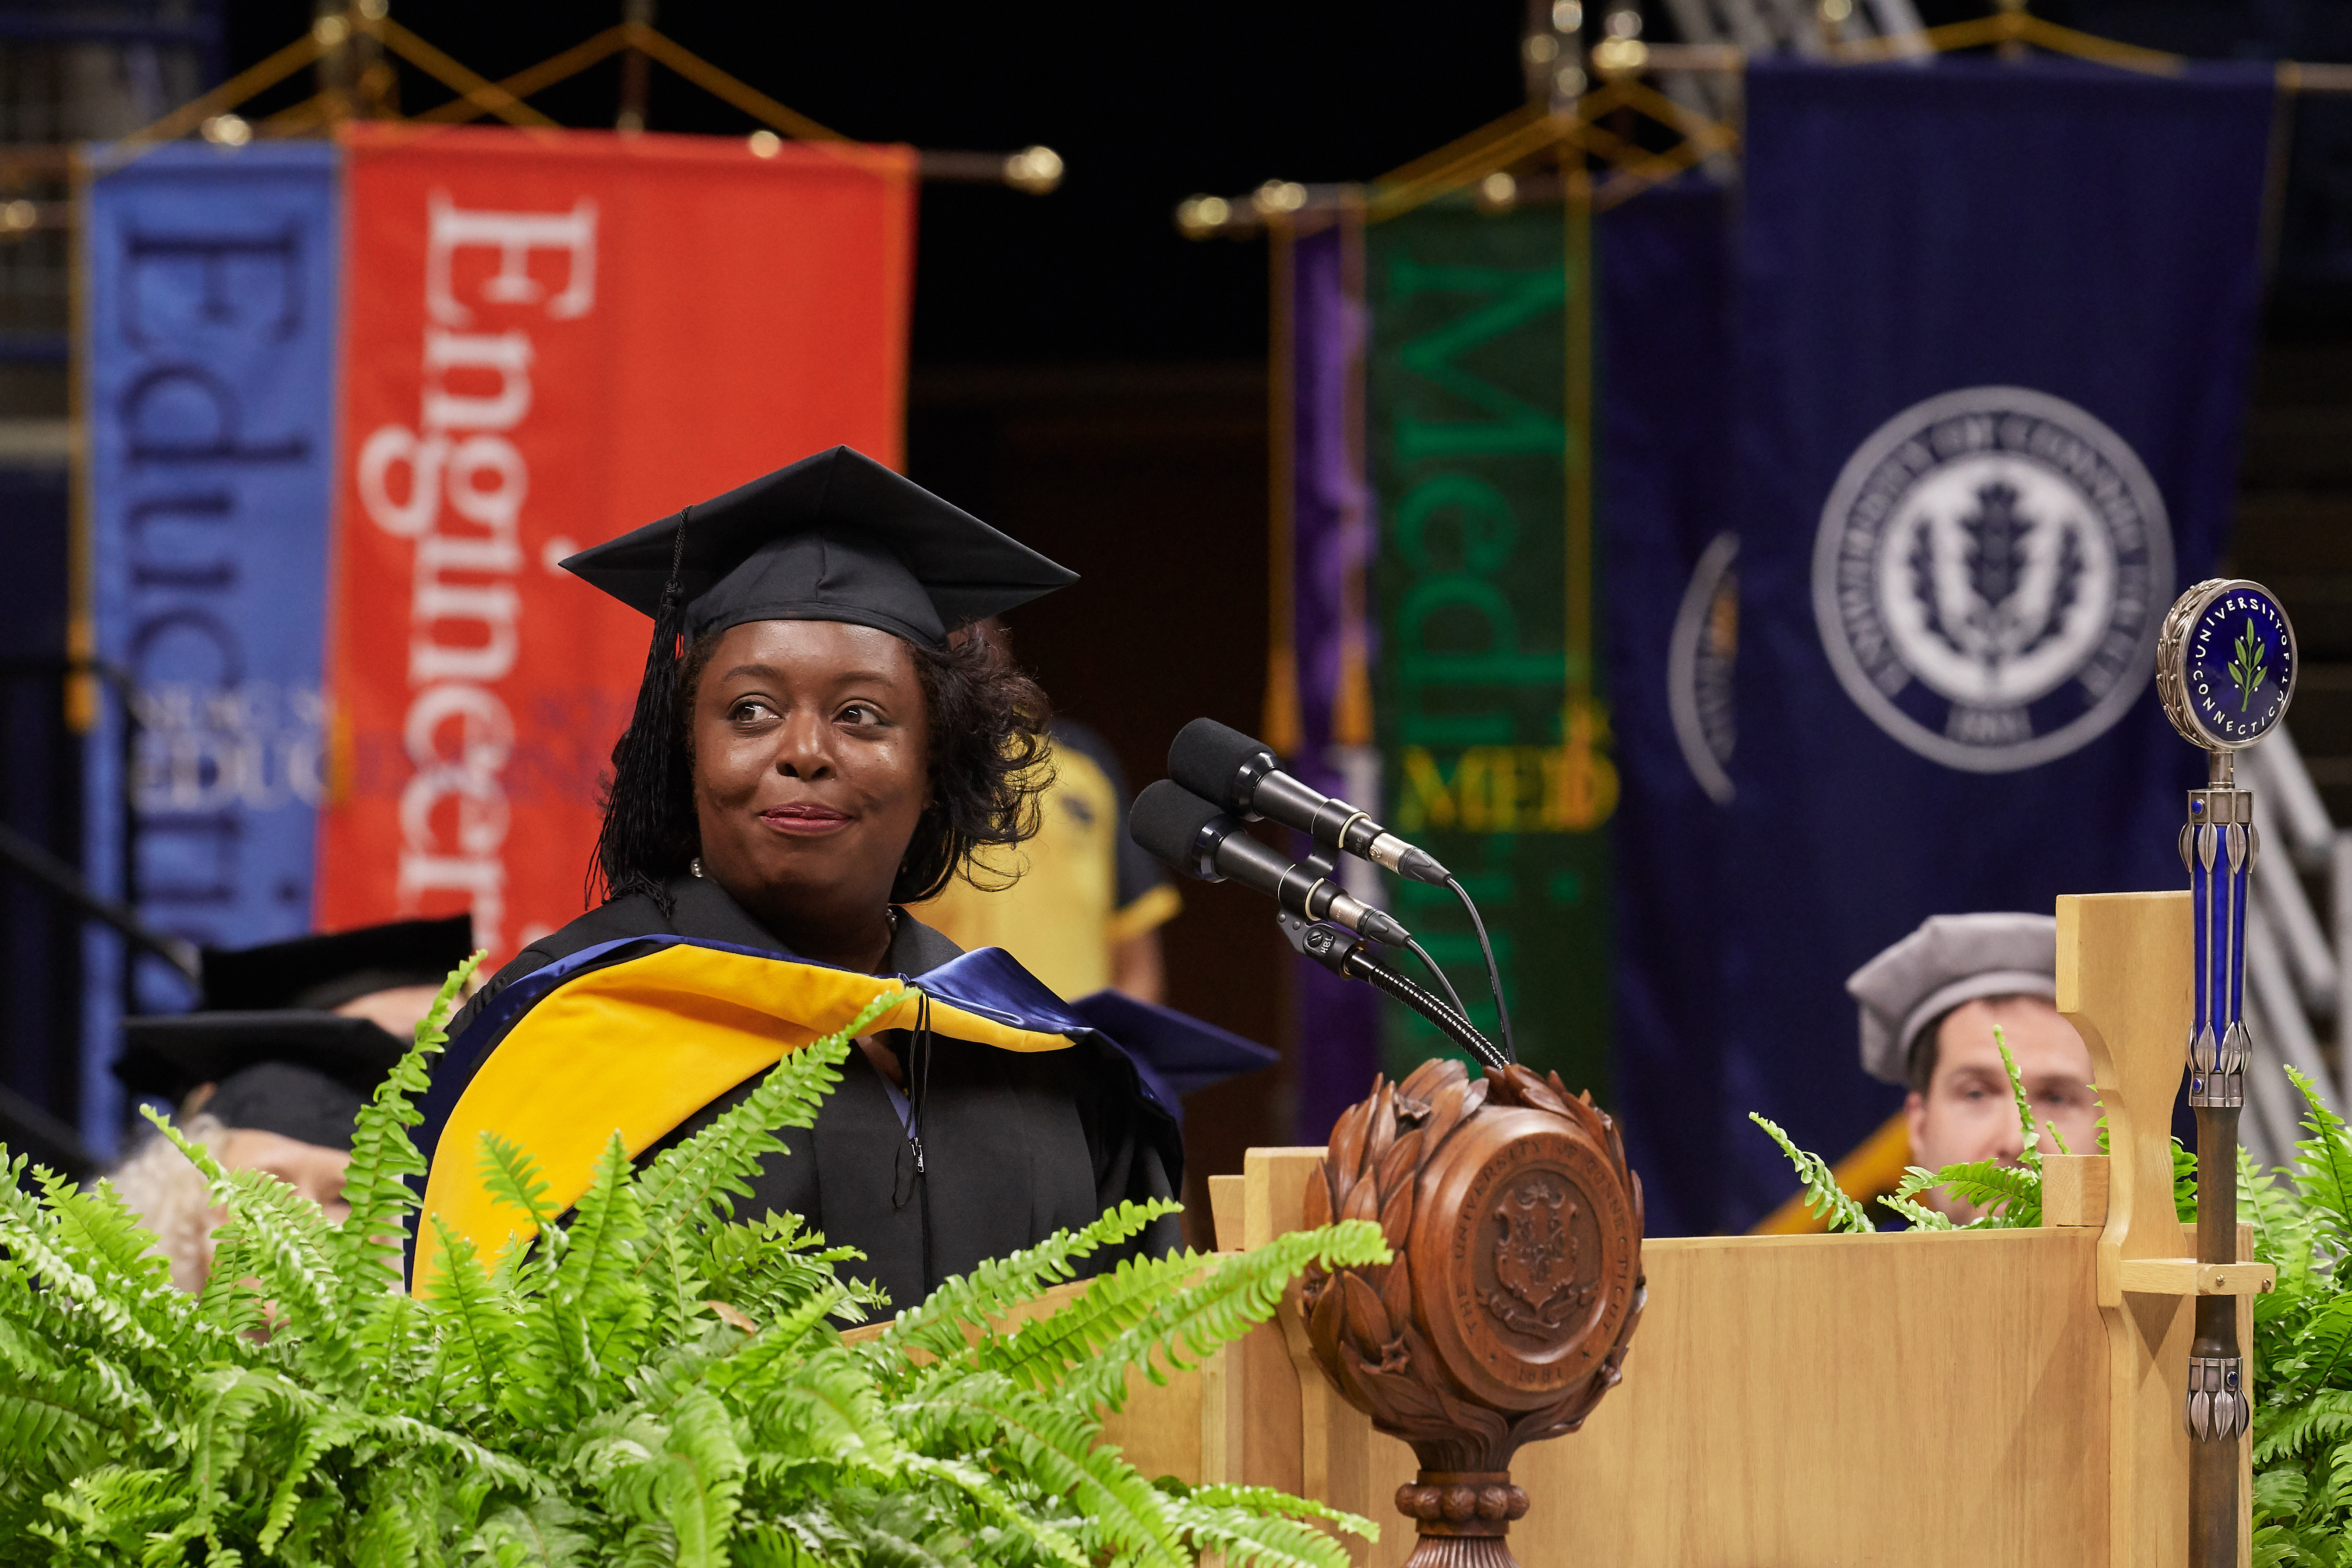 Kimberly Bryant, founder and executive director of Black Girls Code, gives the address at the School of Engineering Commencement ceremony at Gampel Pavilion on May 5, 2018. (Peter Morenus/UConn Photo)